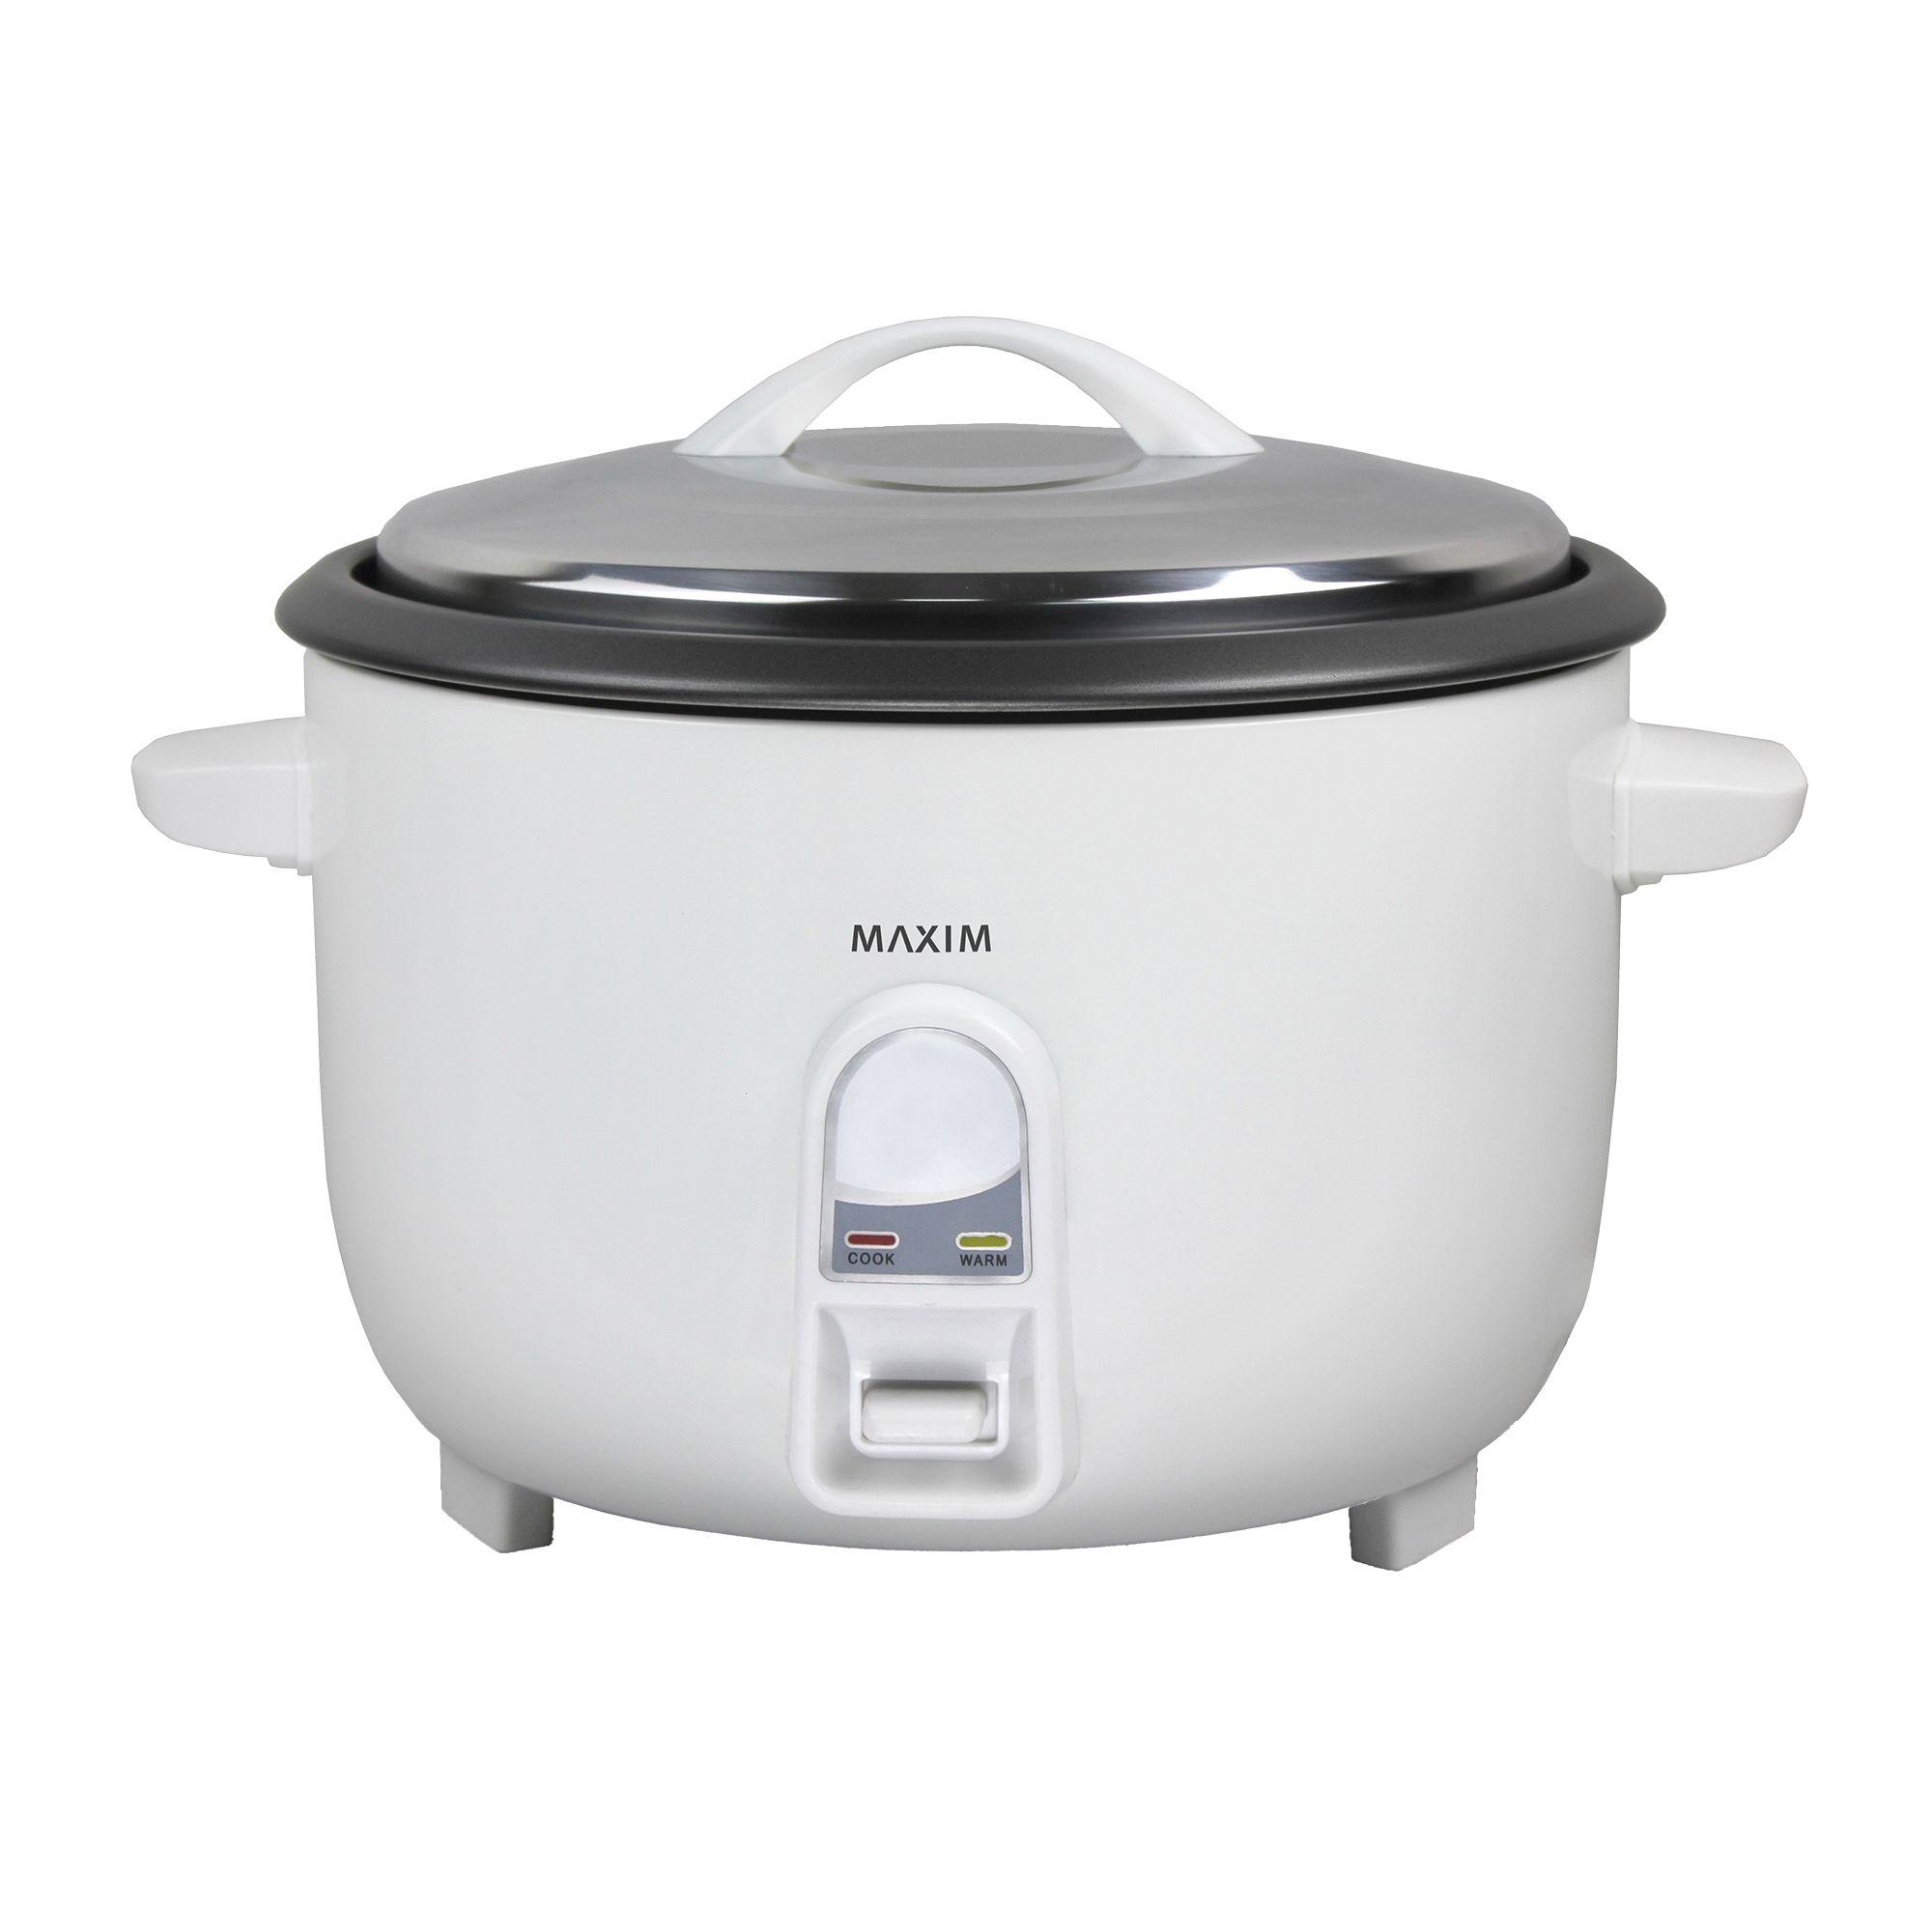 Maxim Rice Cooker 30 Cup White Image 1